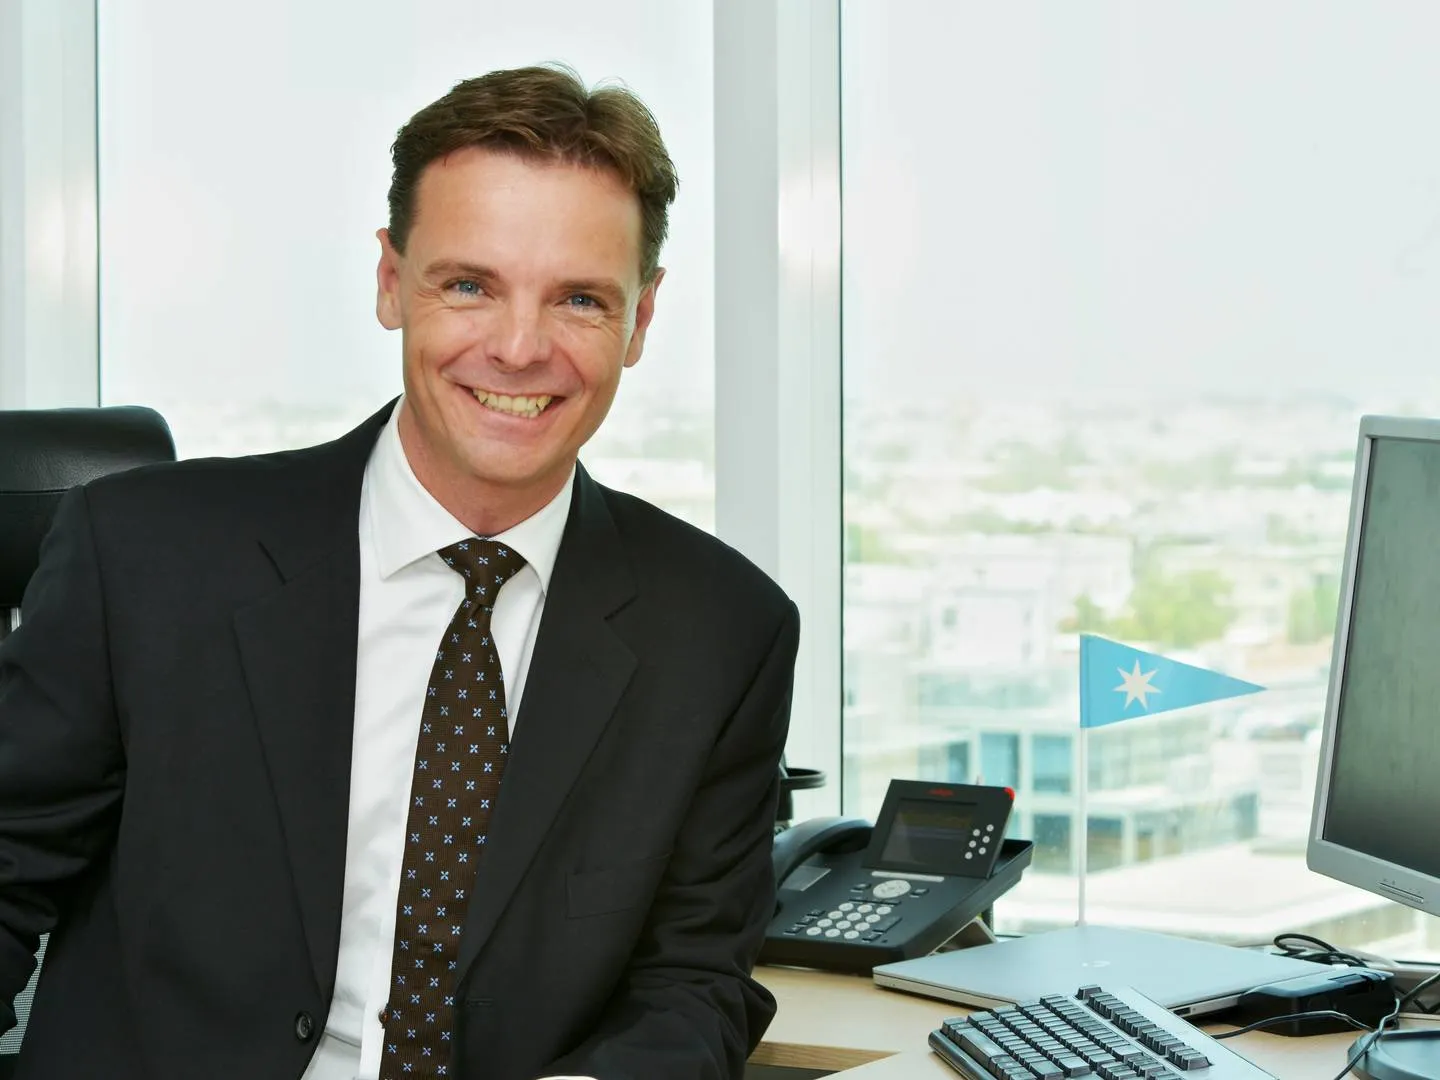 Christian Nyholm, in business attire, sits in an office, representing strategic leadership and organizational trust, themes discussed by JOH Partners.